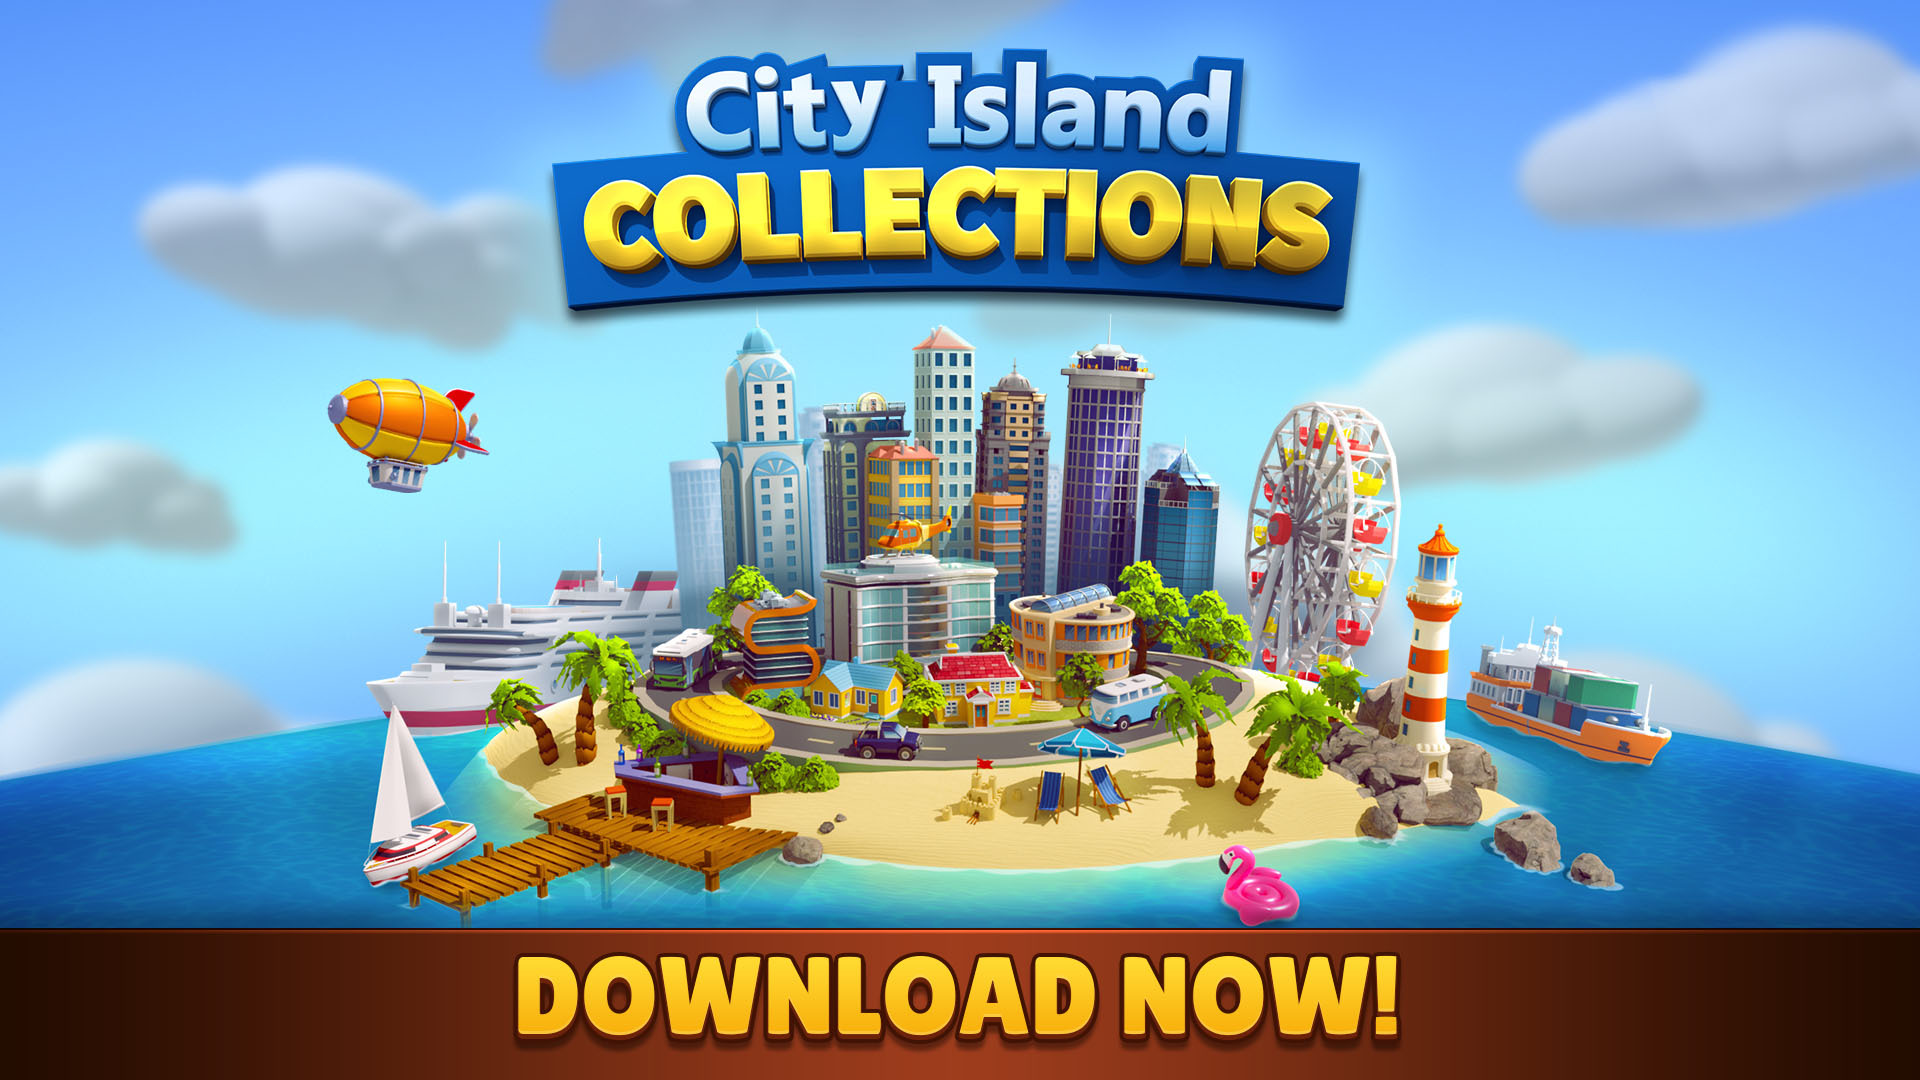 City Island Collections